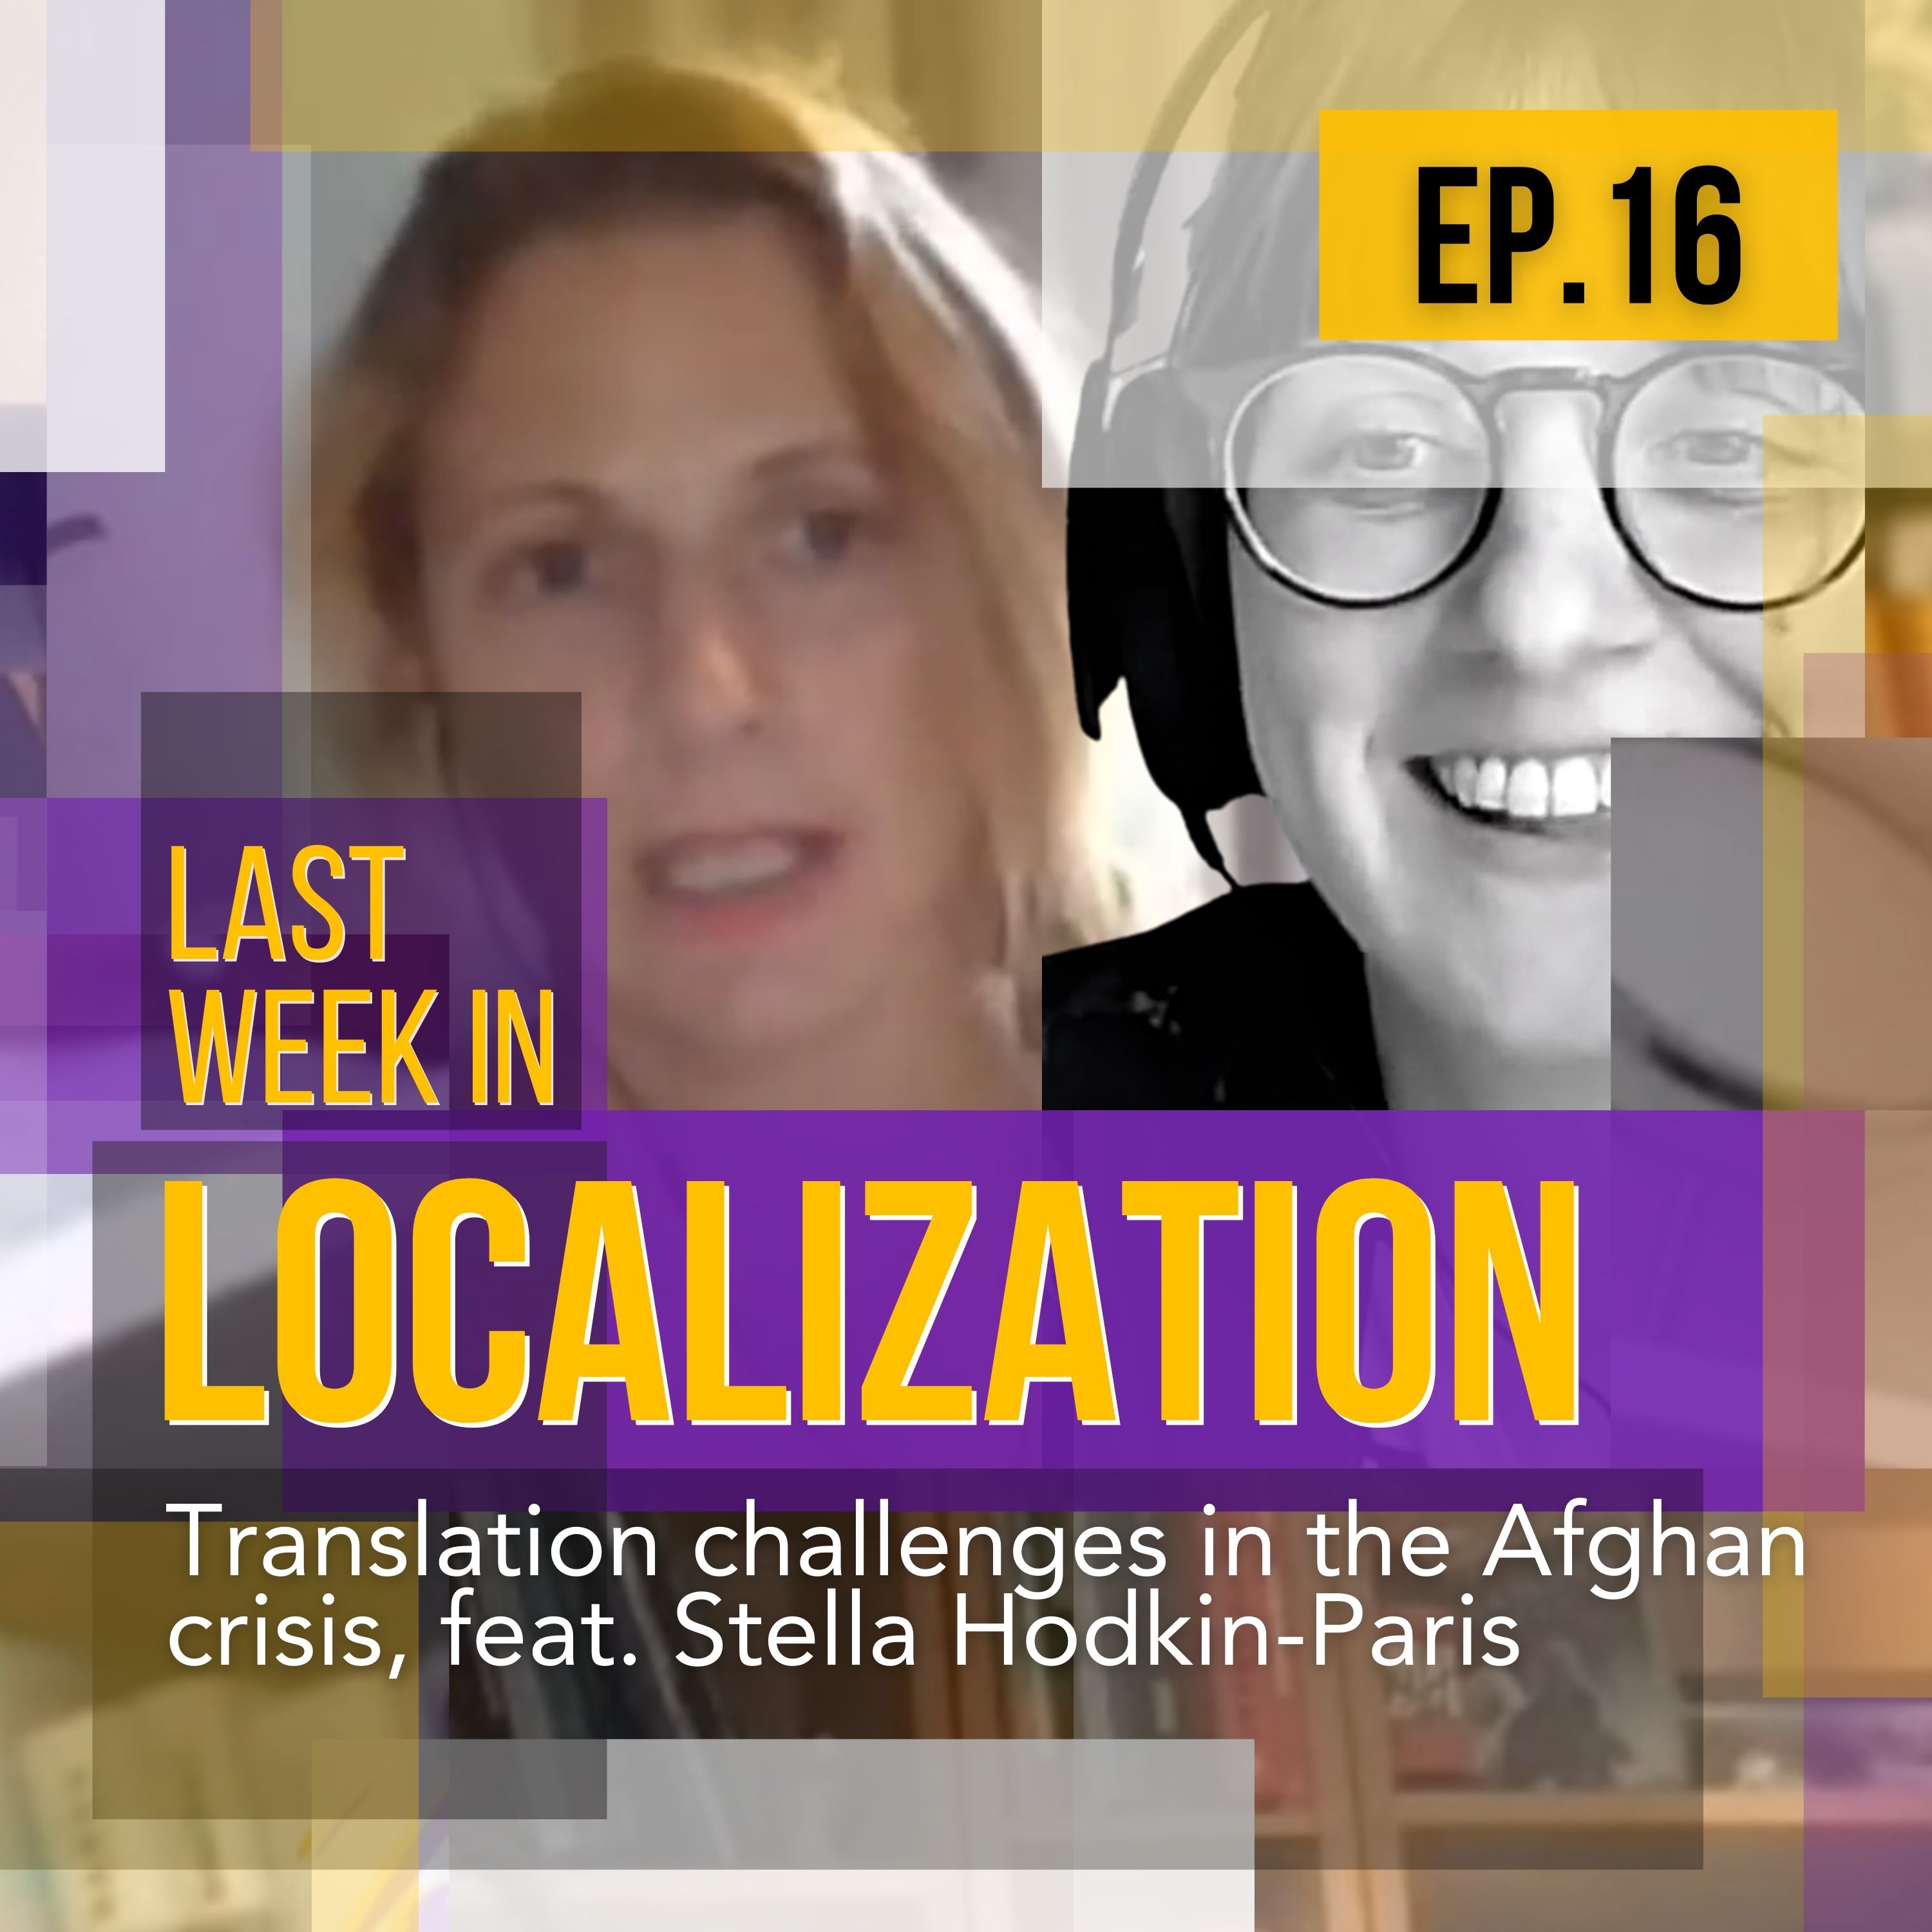 Translation challenges in the Afghan crisis, feat. Stella Hodkin Paris of Translators Without Borders